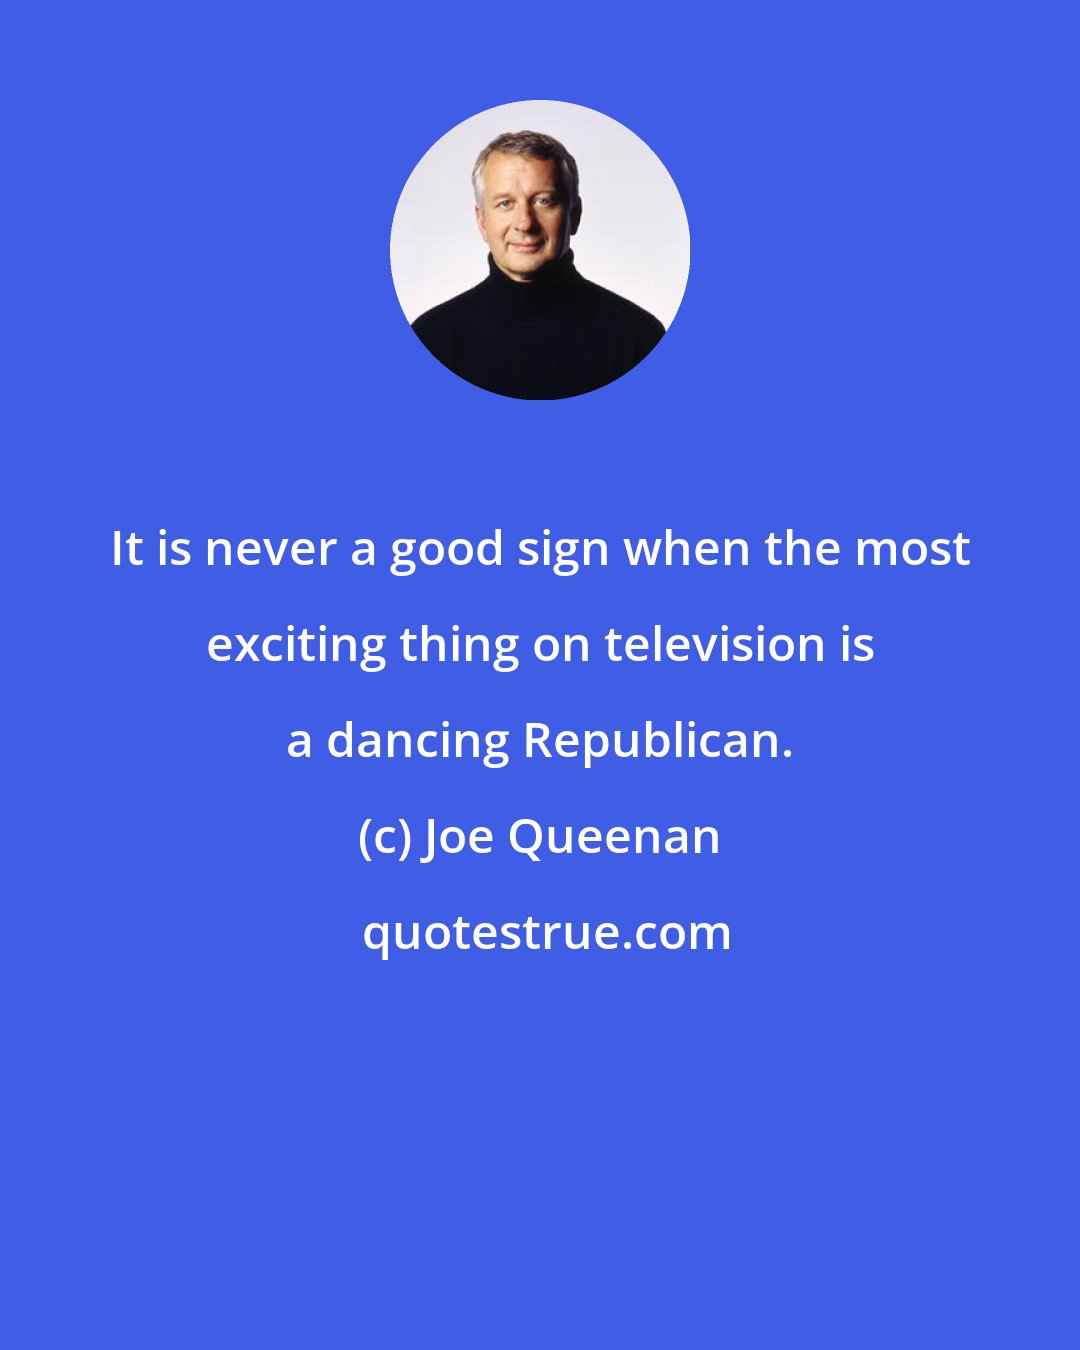 Joe Queenan: It is never a good sign when the most exciting thing on television is a dancing Republican.